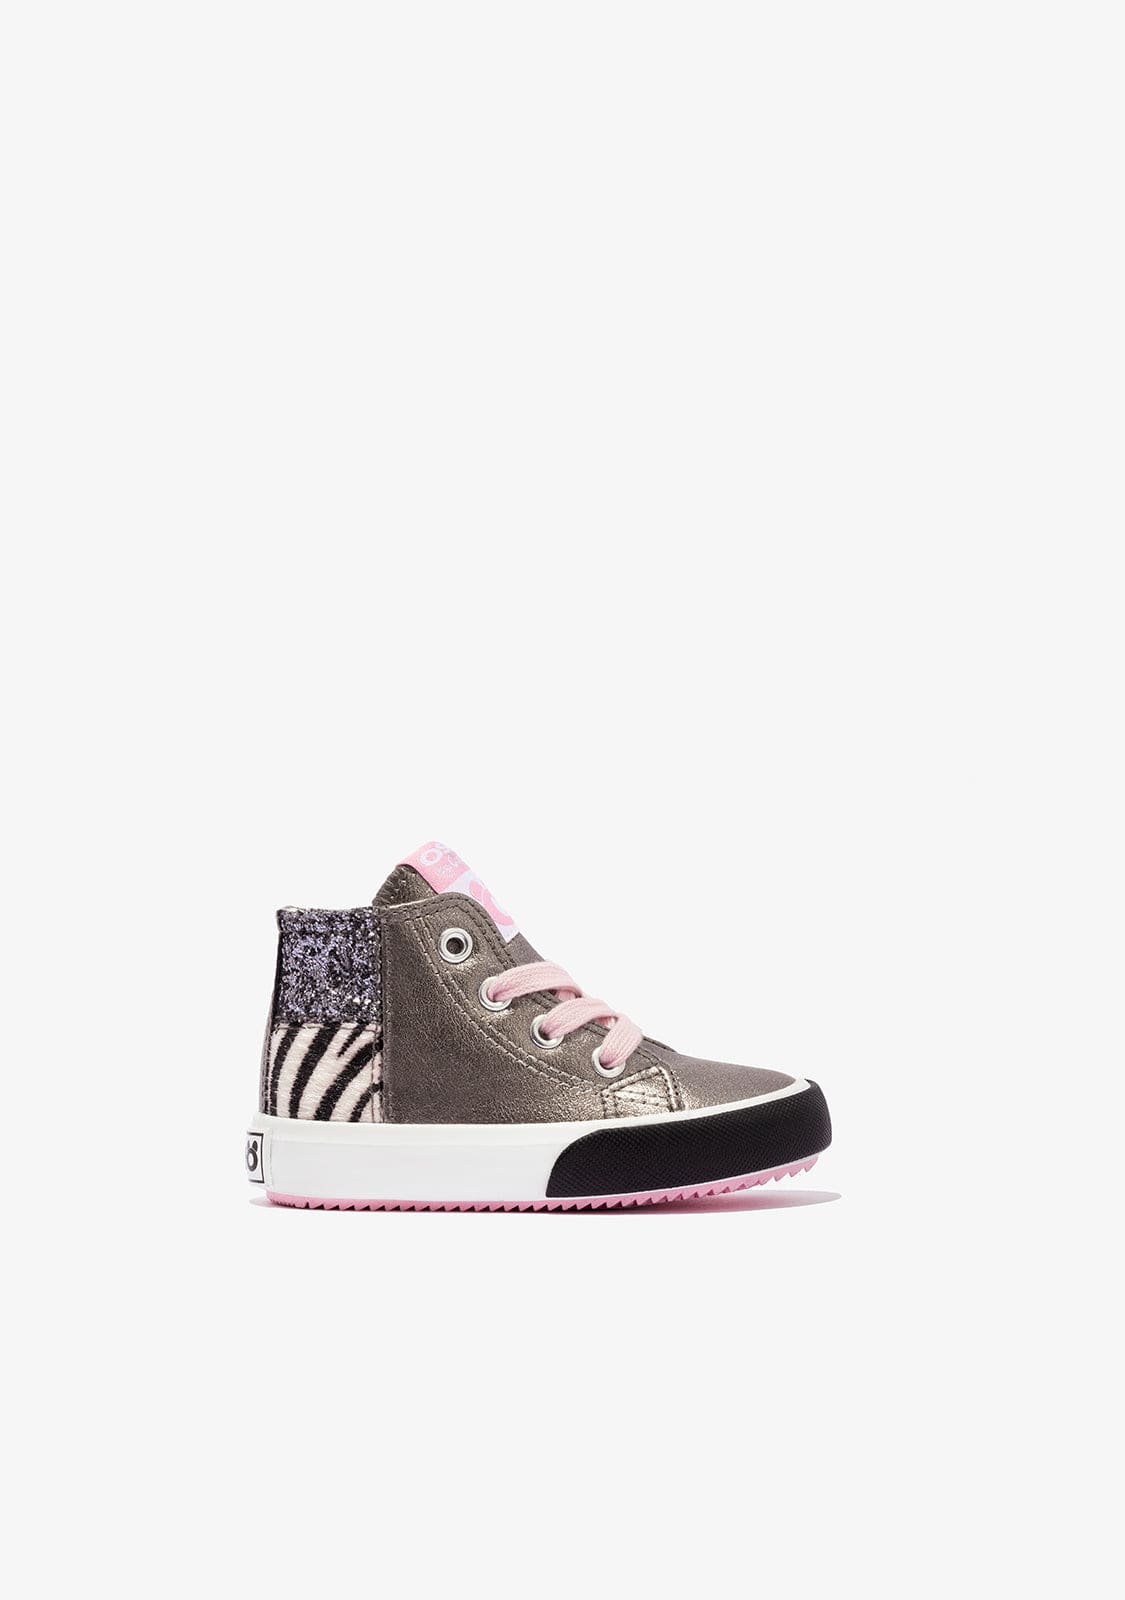 OSITO Shoes Baby's Multicolour Patchwork Hi-Top Sneakers